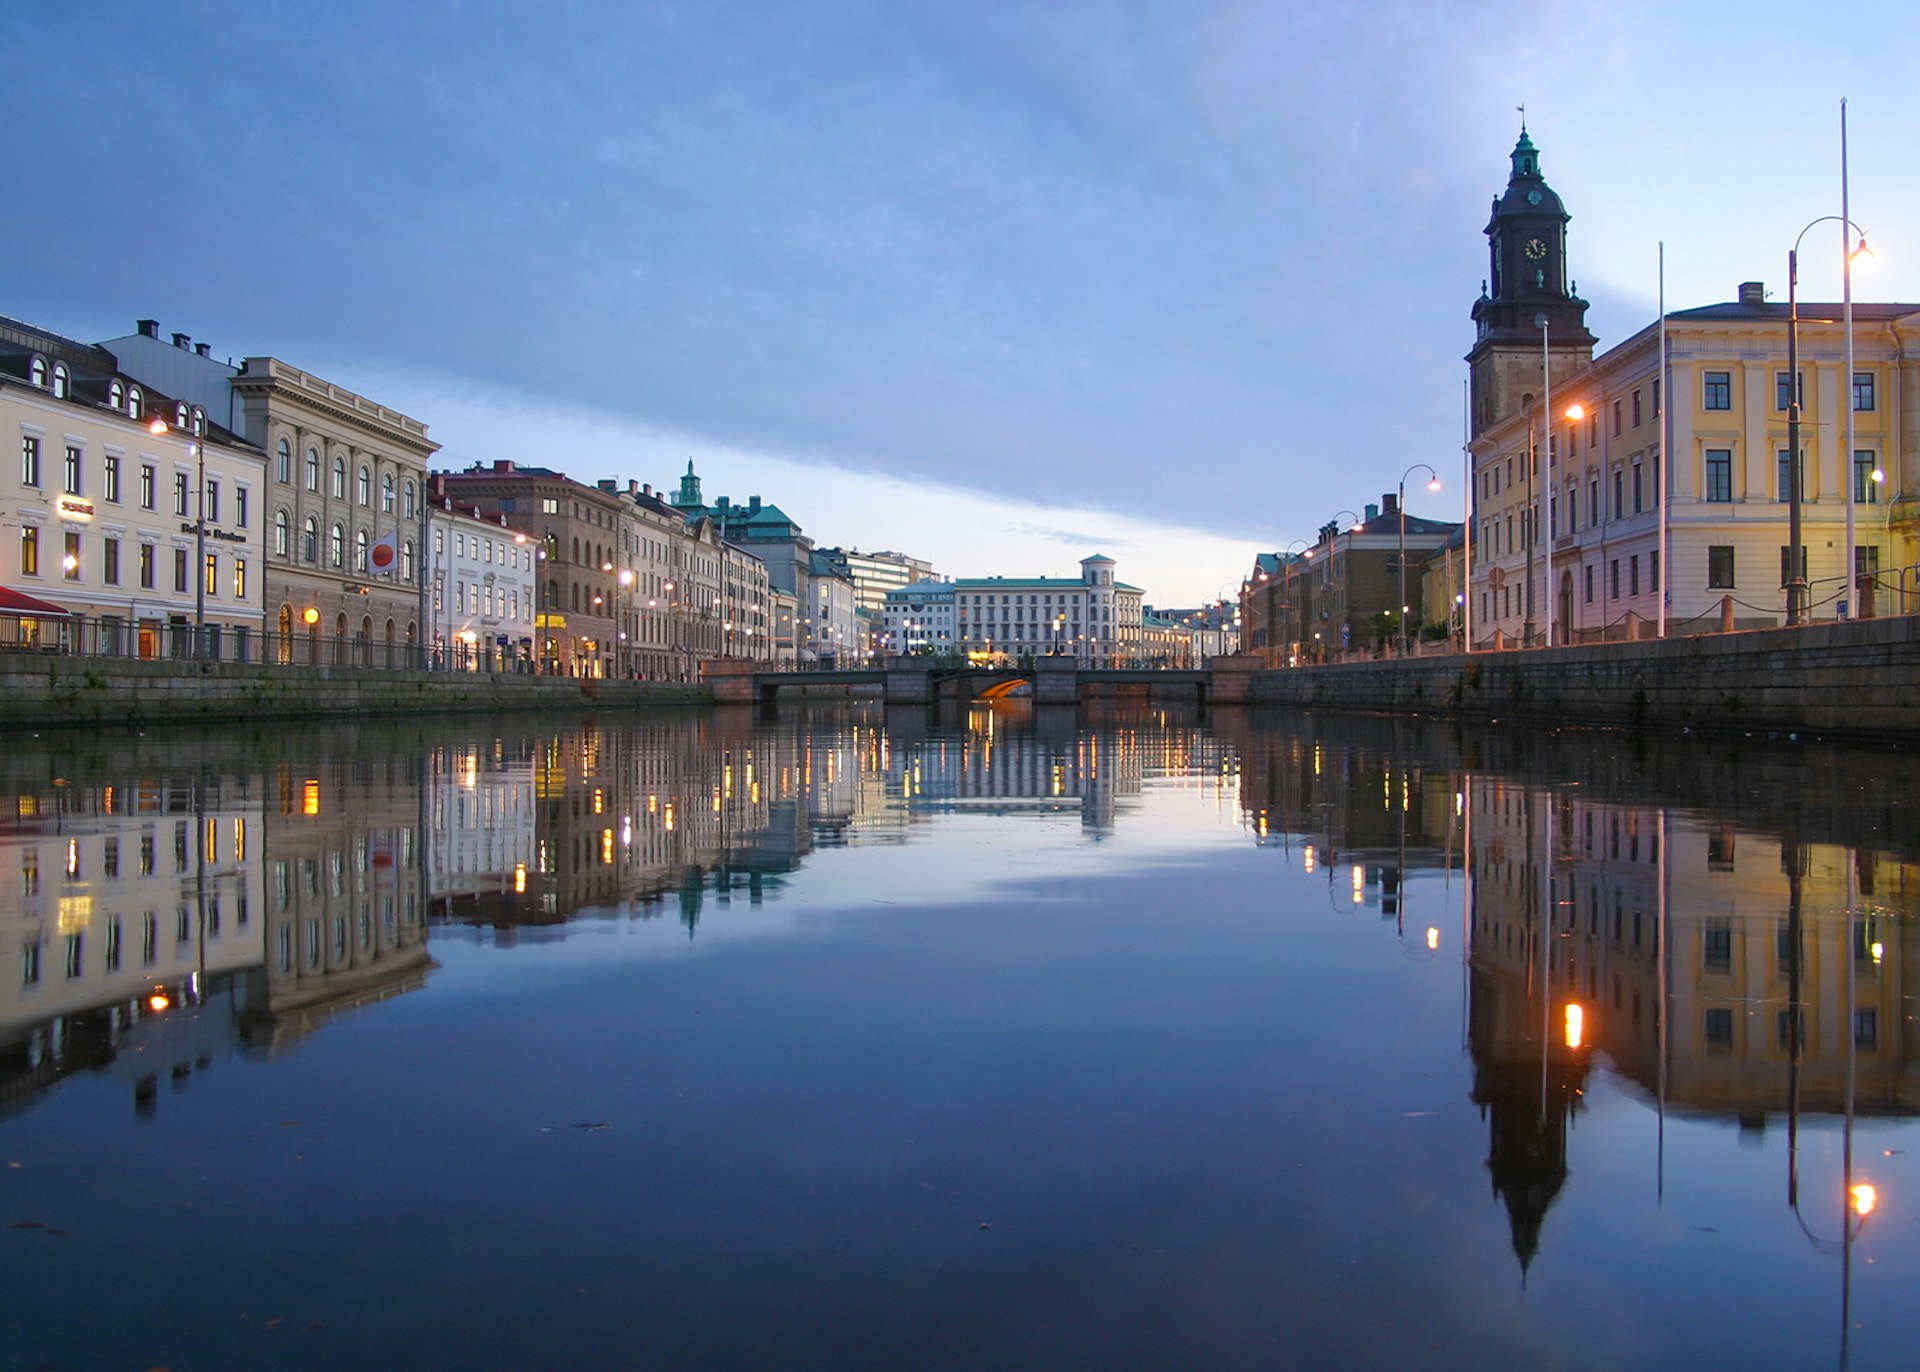 The central canal (Stora Hamnkanalen) through downtown Gothenburg © Andreas Bitterer / Getty Images